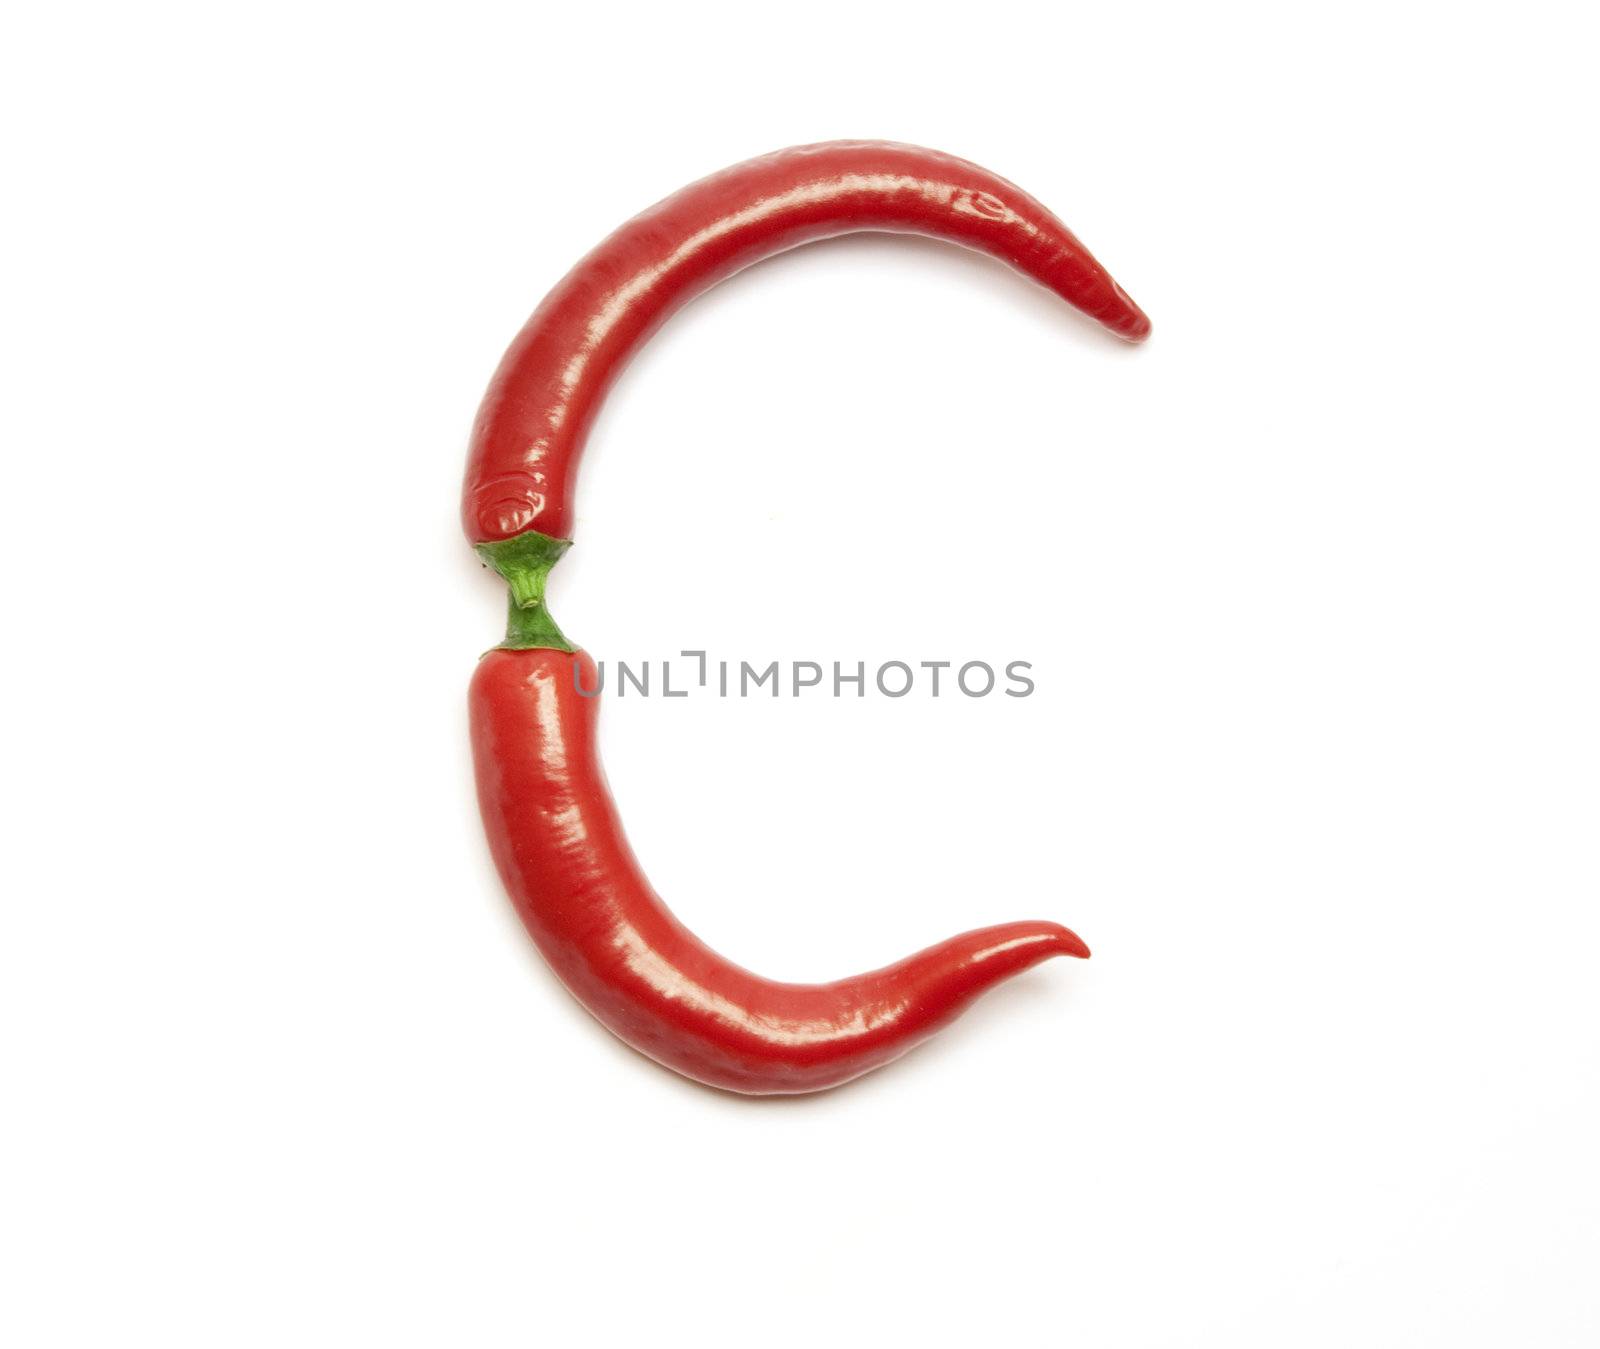 Letter made from red peppers by Arsen